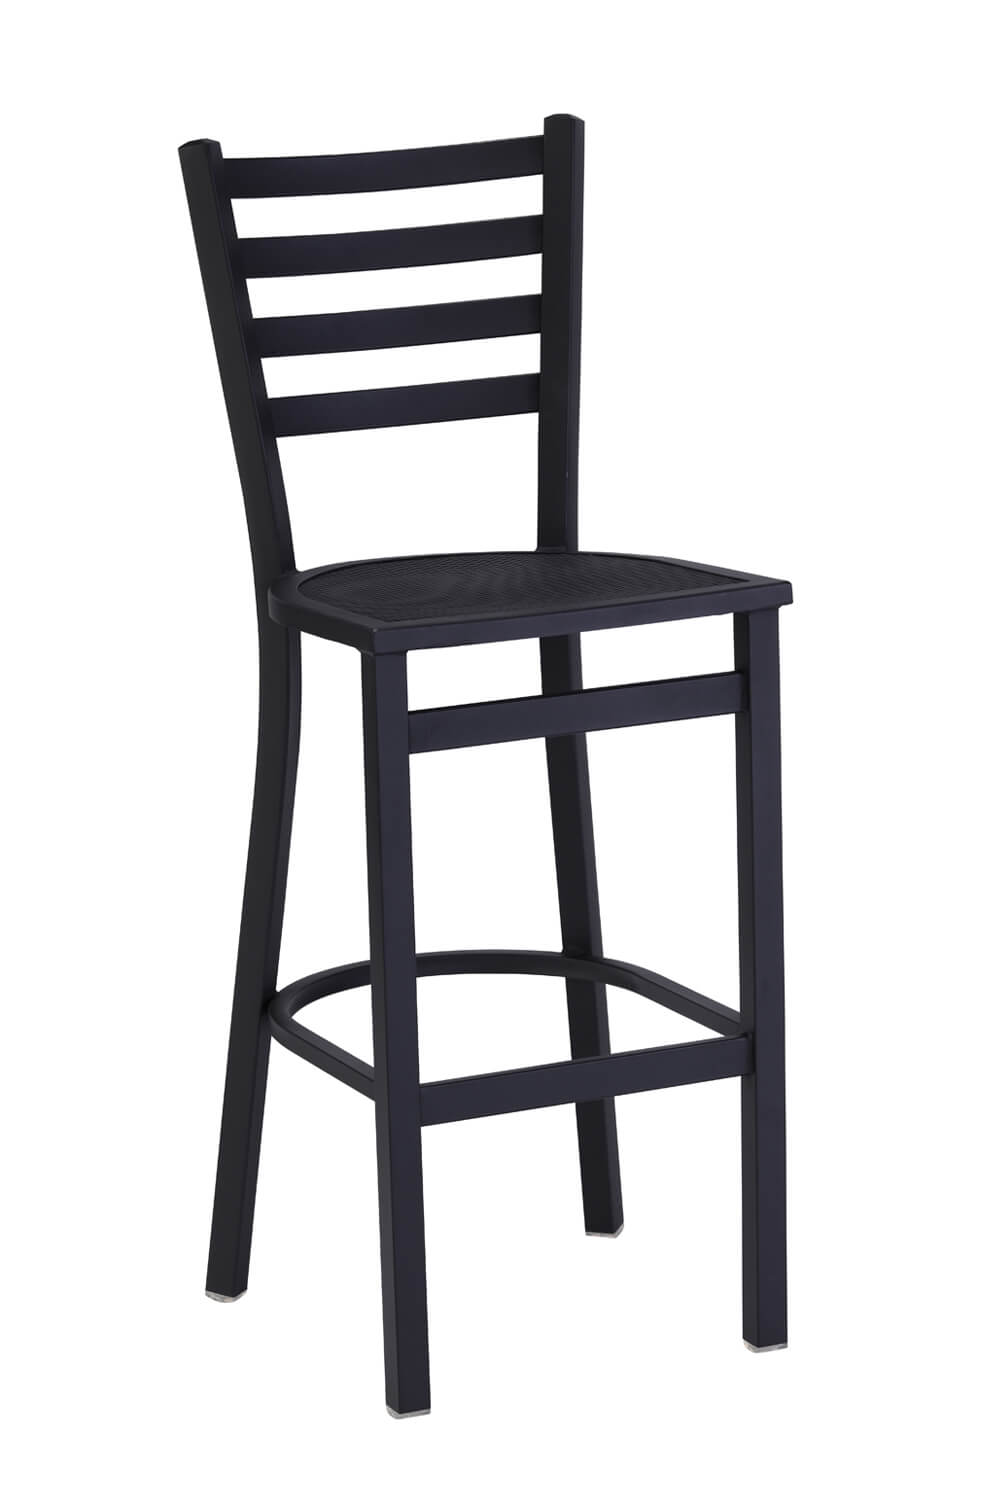 Holland Co S Jackie Black Outdoor Stool, Outdoor Wooden Bar Stools With Backs